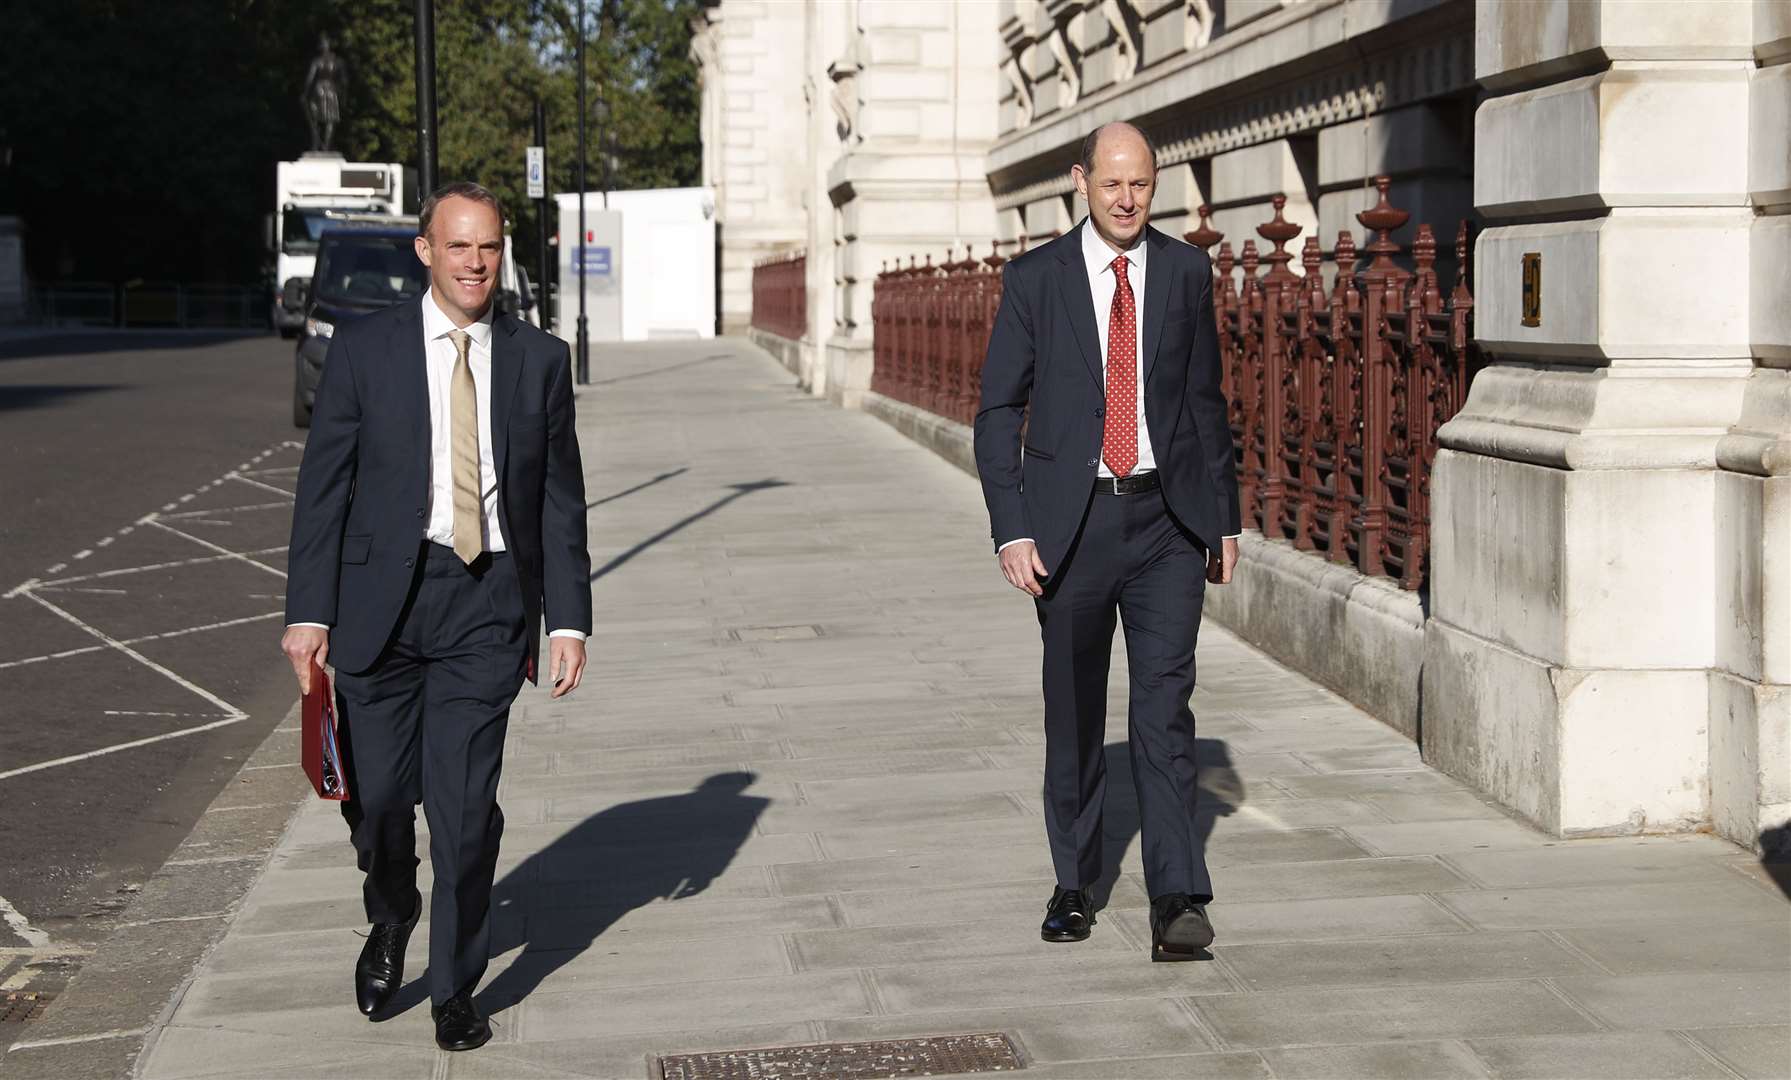 Foreign Secretary Dominic Raab arrives with new permanent under-secretary Philip Barton at the newly named Foreign, Commonwealth and Development office in King Charles Street, Westminster (Alastair Grant/PA)